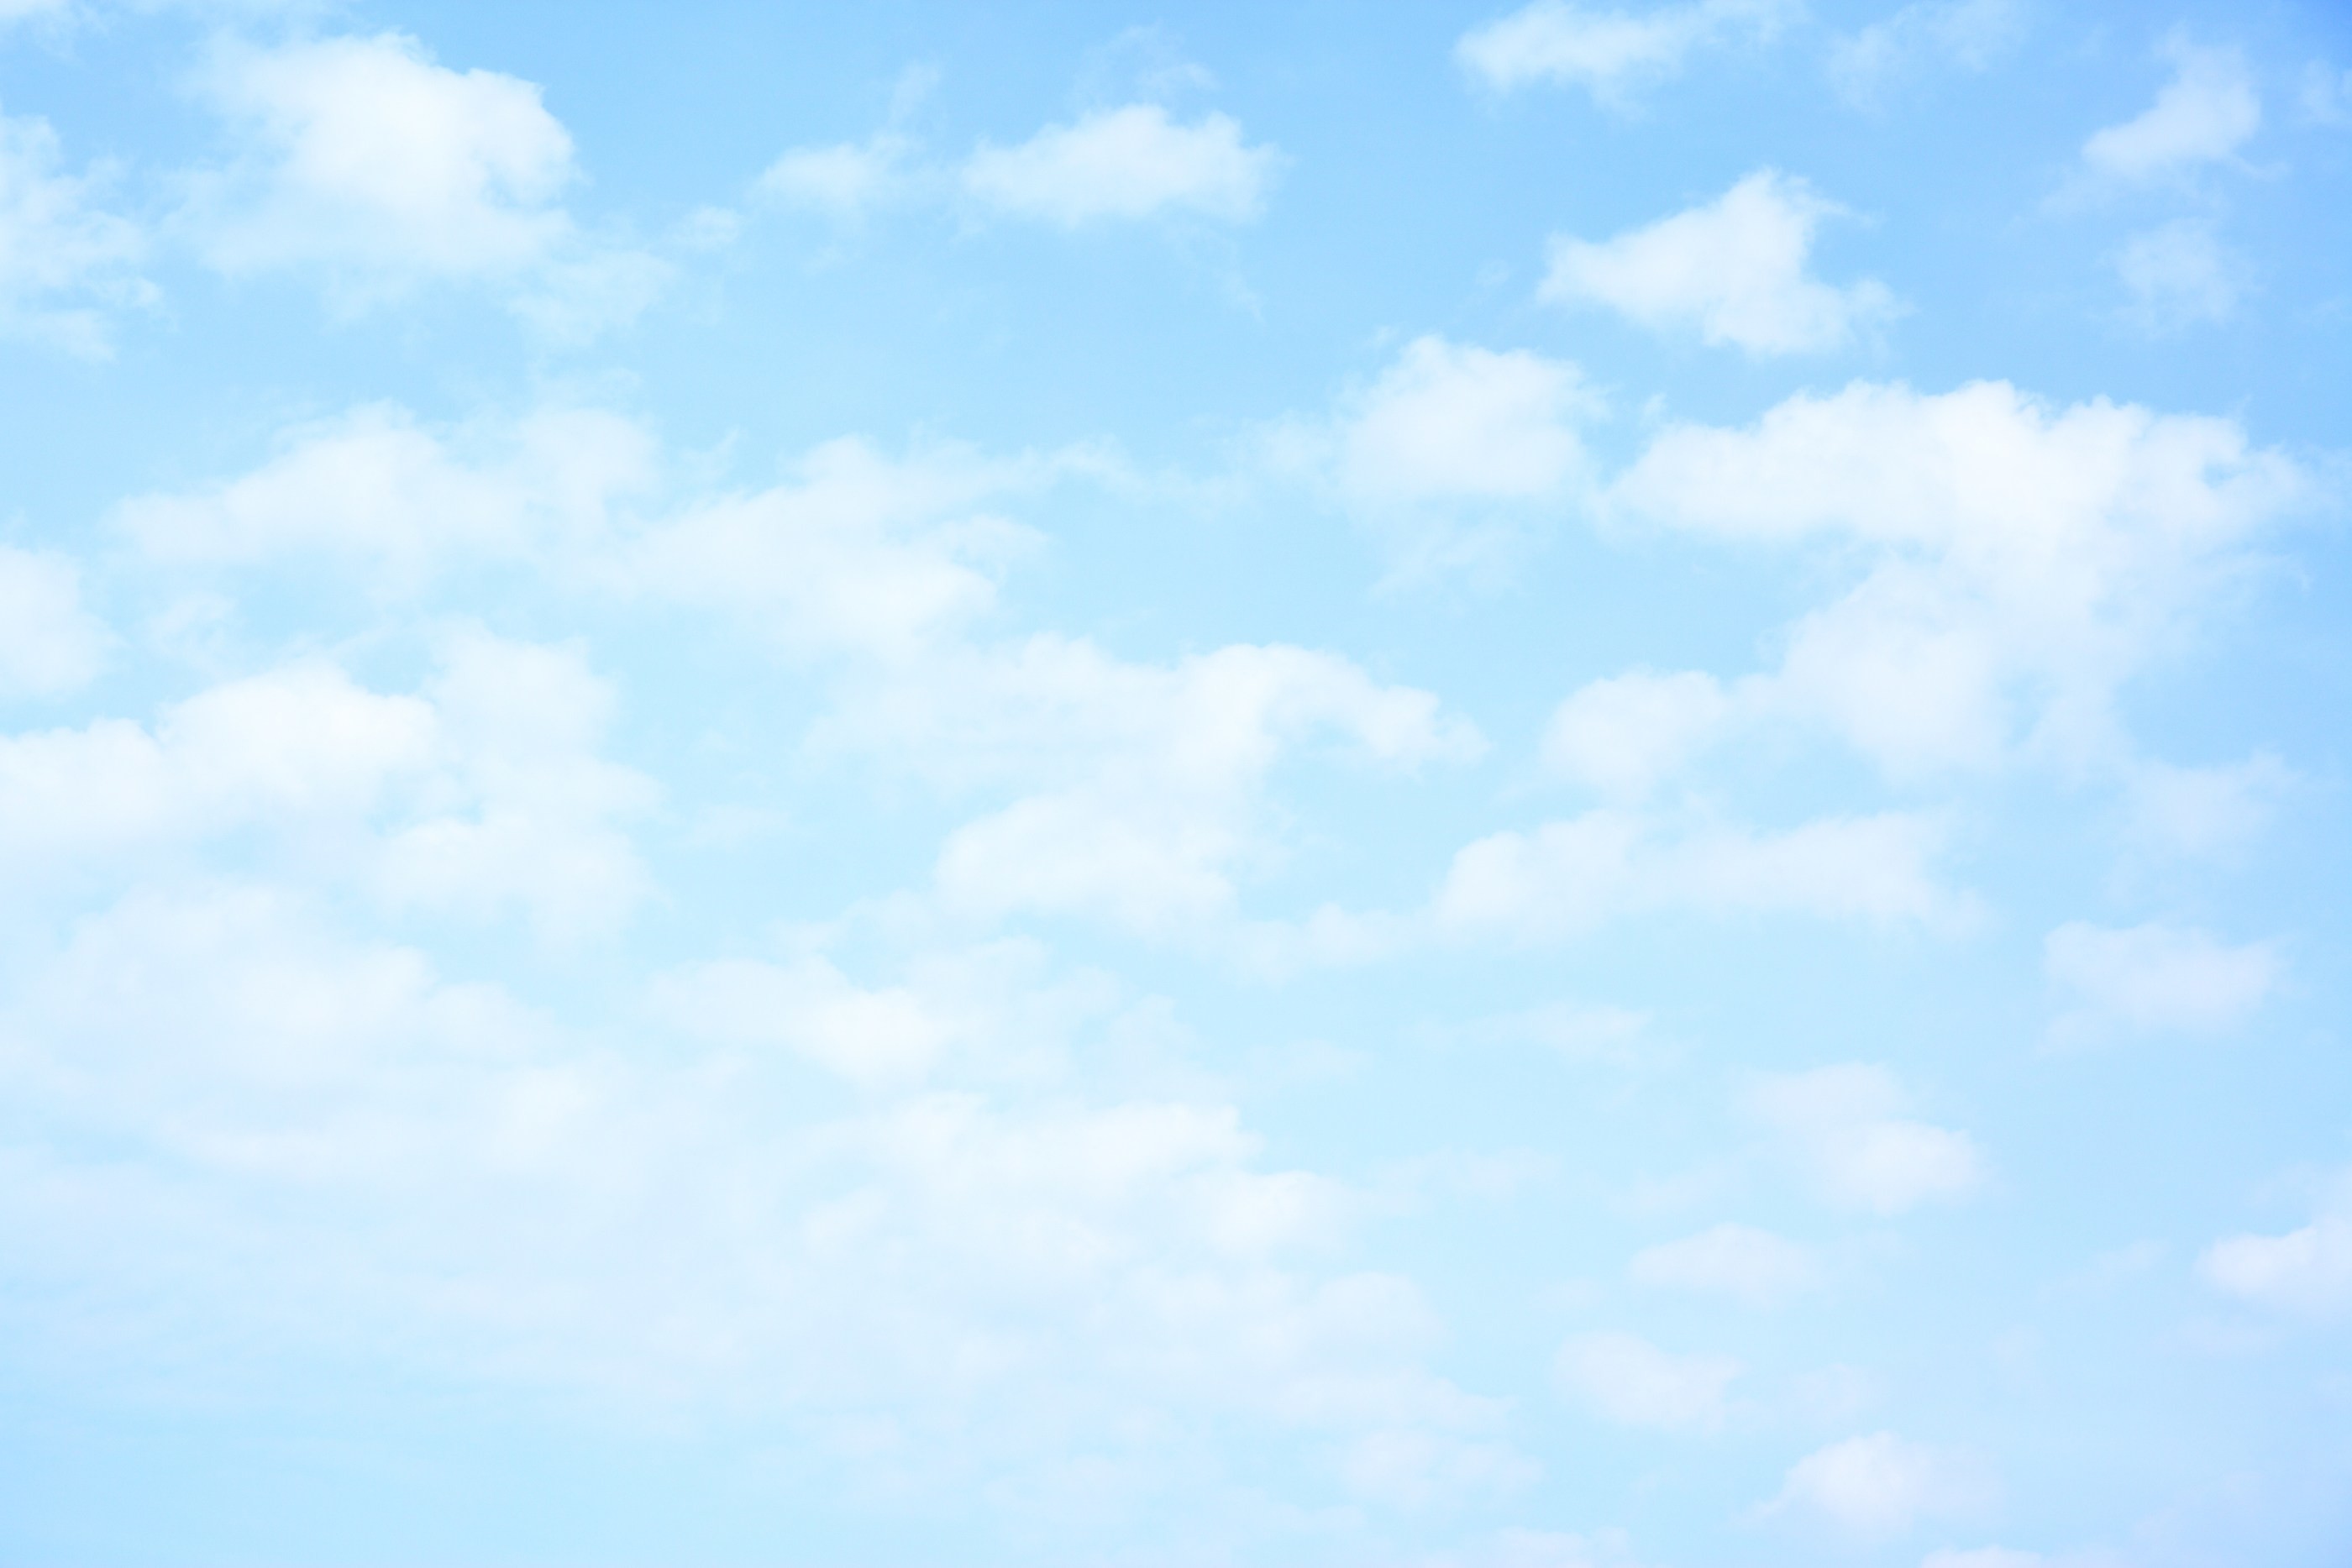 2800x1867 Light blue sky with clouds, may be used as background